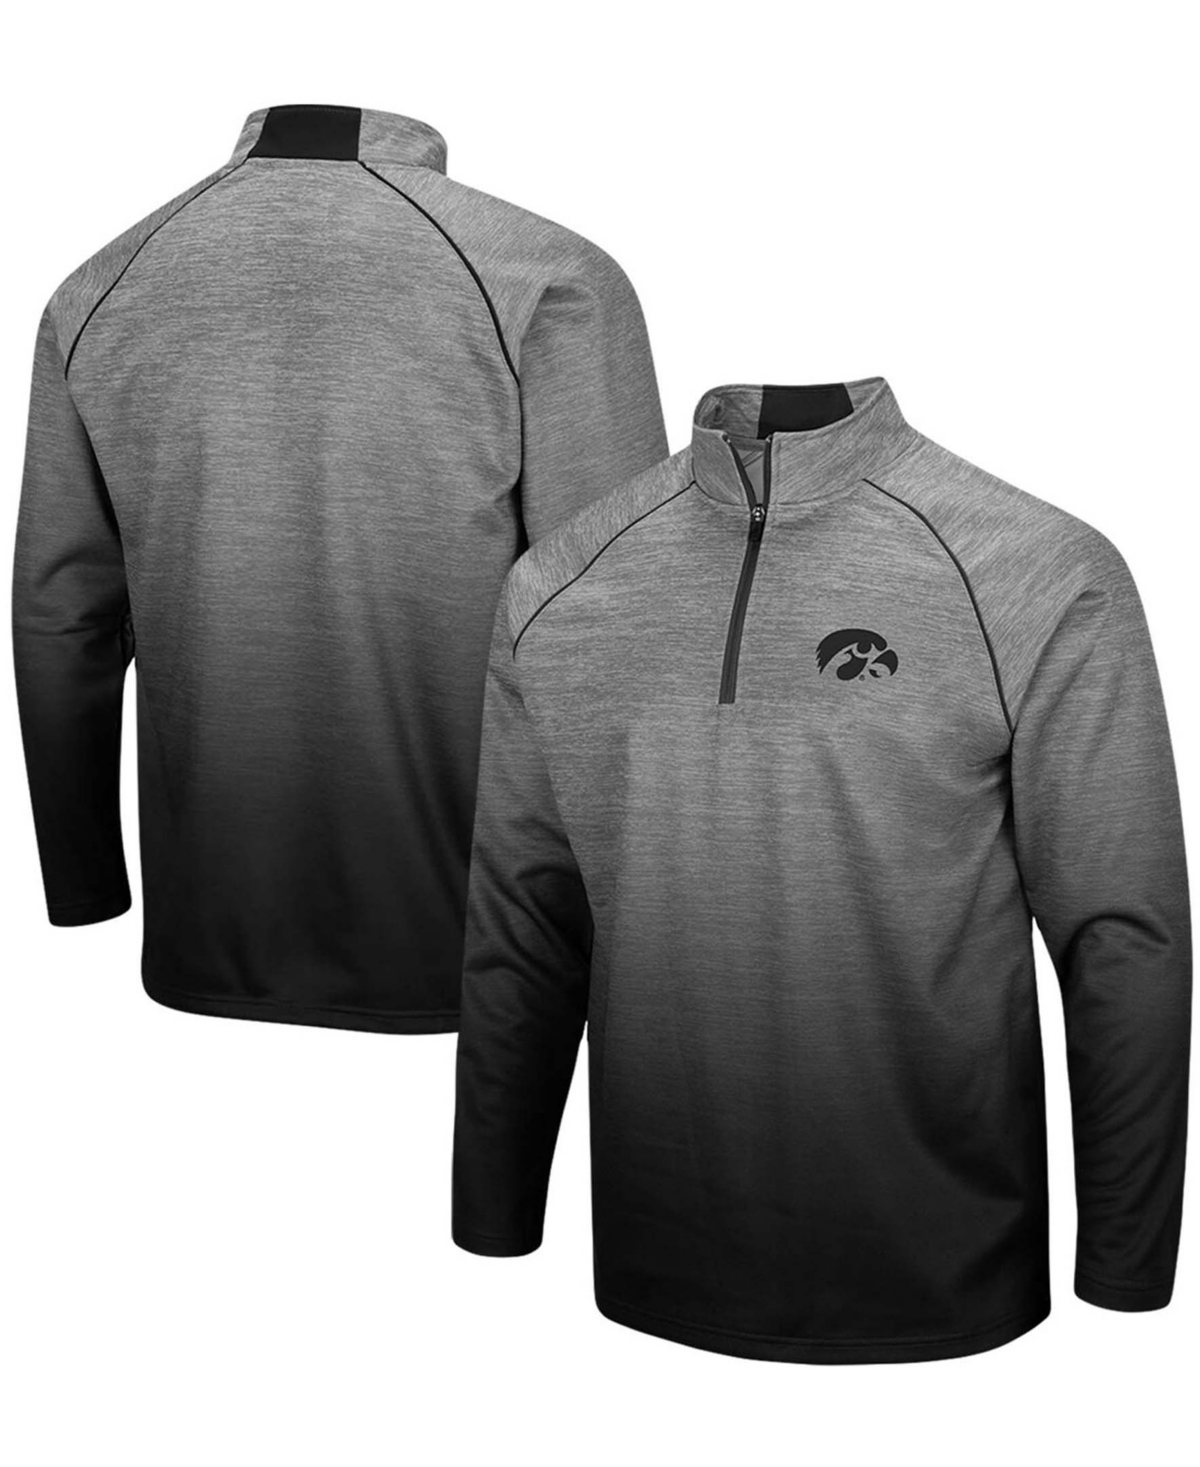 COLOSSEUM MEN'S HEATHERED GRAY IOWA HAWKEYES SITWELL SUBLIMATED QUARTER-ZIP PULLOVER JACKET